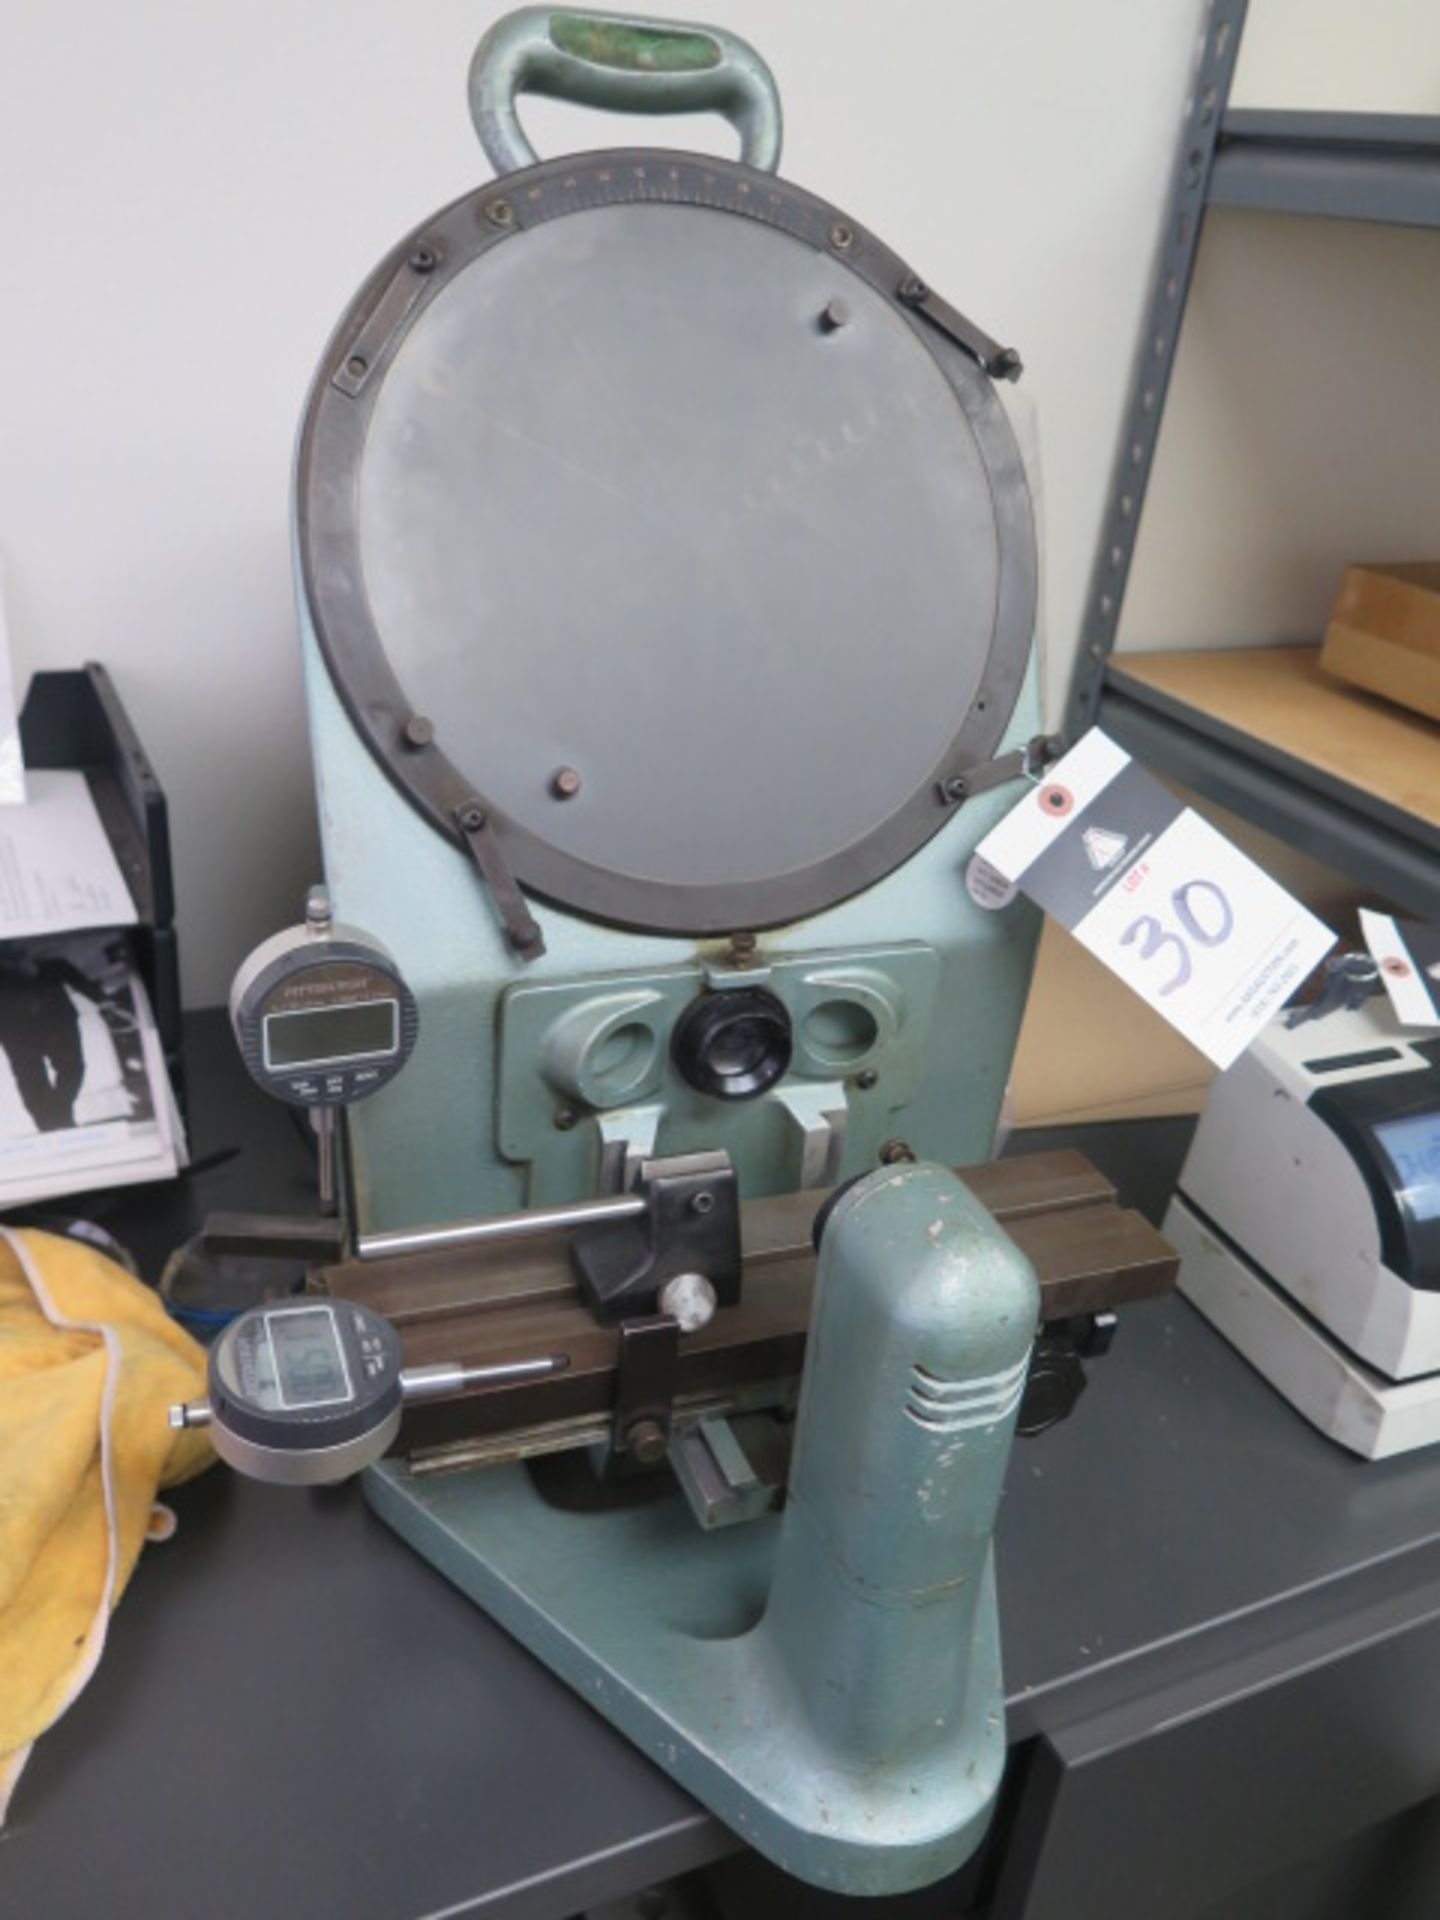 Rankin Brothers 10" Bench Model Optical Comparator w/ Digital Indicator Readouts - Image 2 of 5